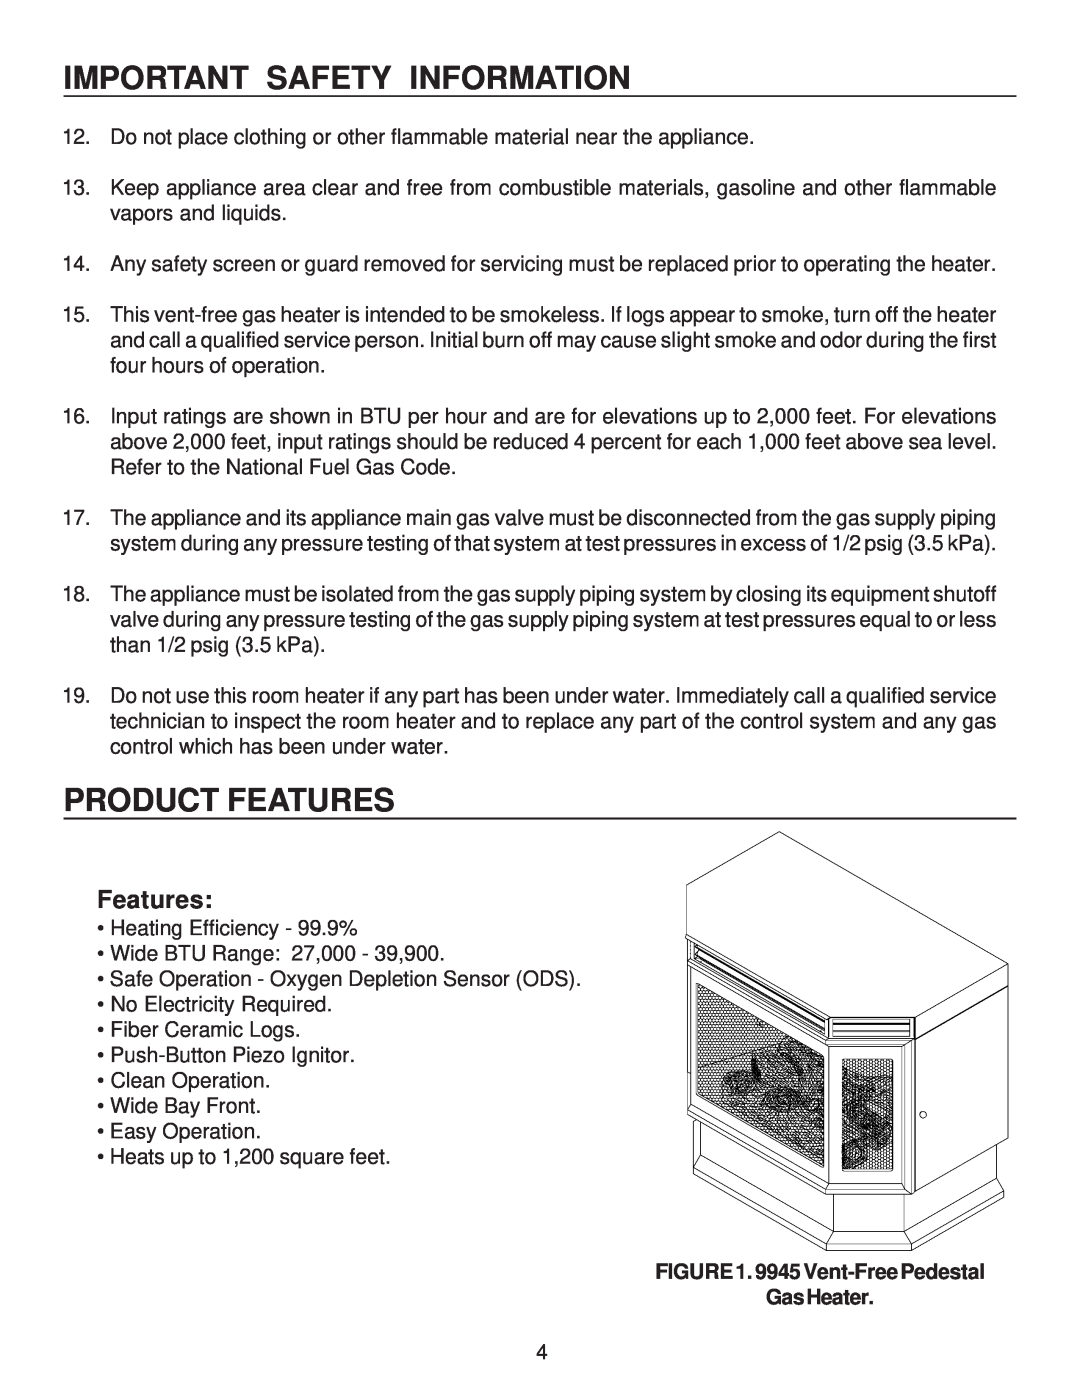 United States Stove B9945L manual Product Features, 9945 Vent-FreePedestal GasHeater, Important Safety Information 